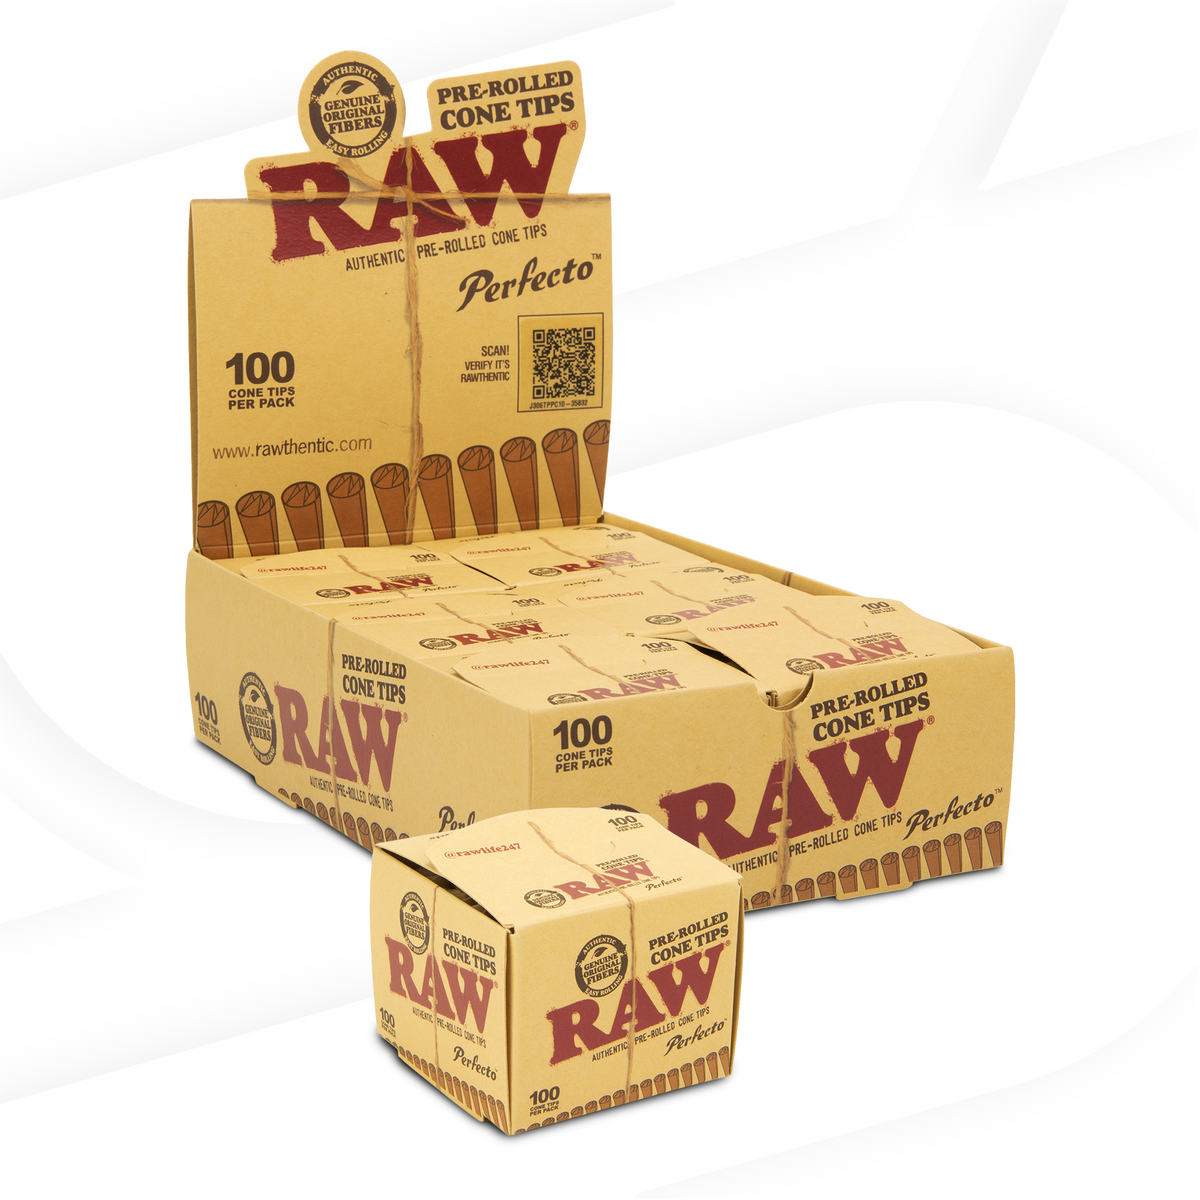 RAW Pre- Rolled Wide Tips Rolling Tips RAWB-RATH-0018 esd-official